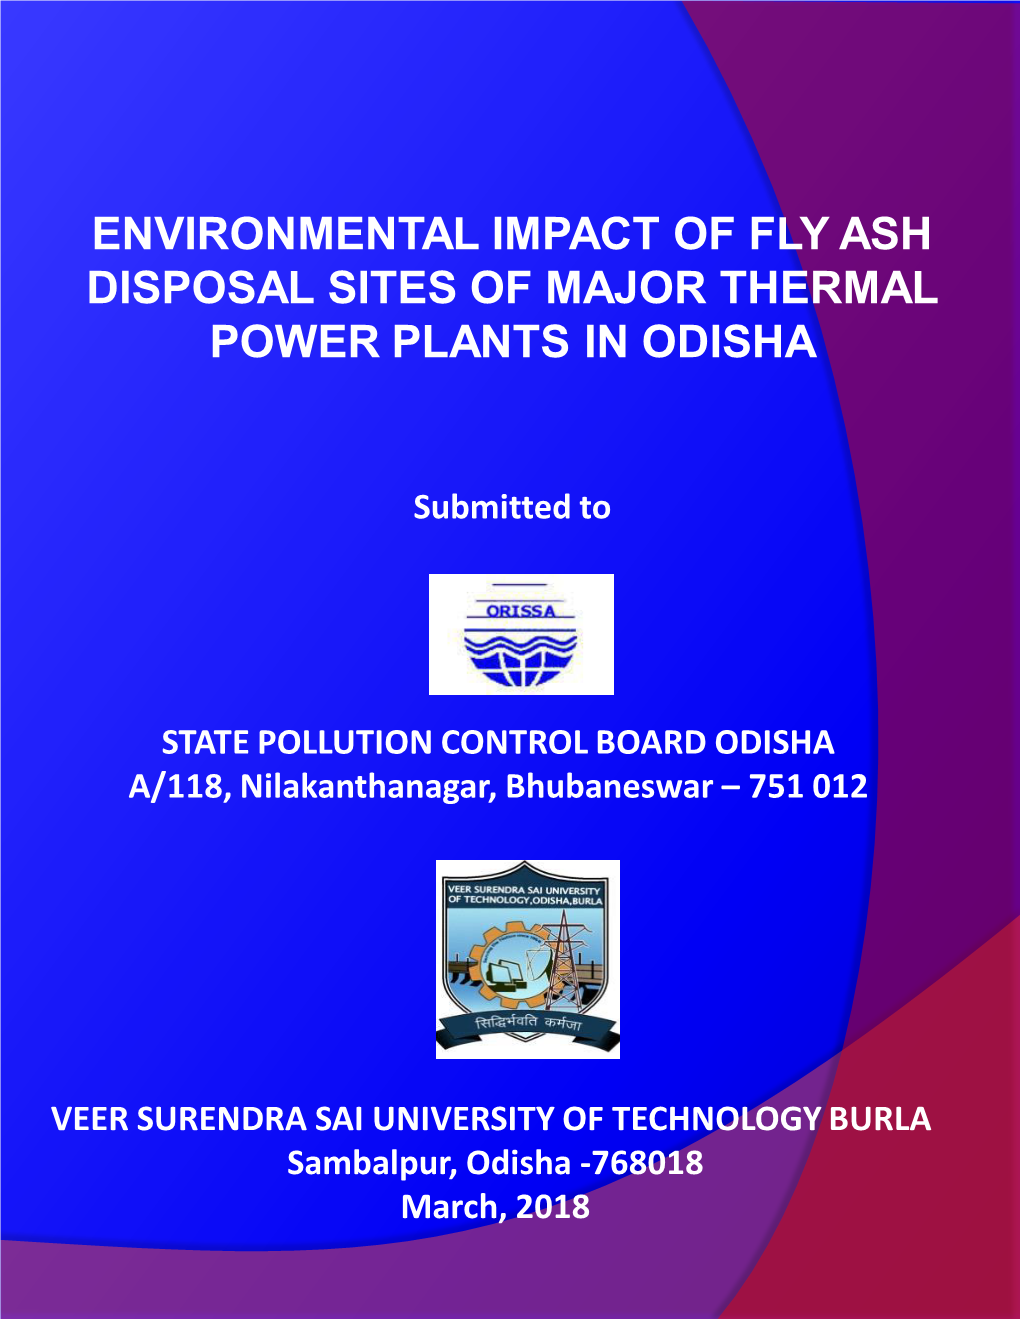 Final Report on Environmental Impact of Fly Ash Disposal Sites of Major